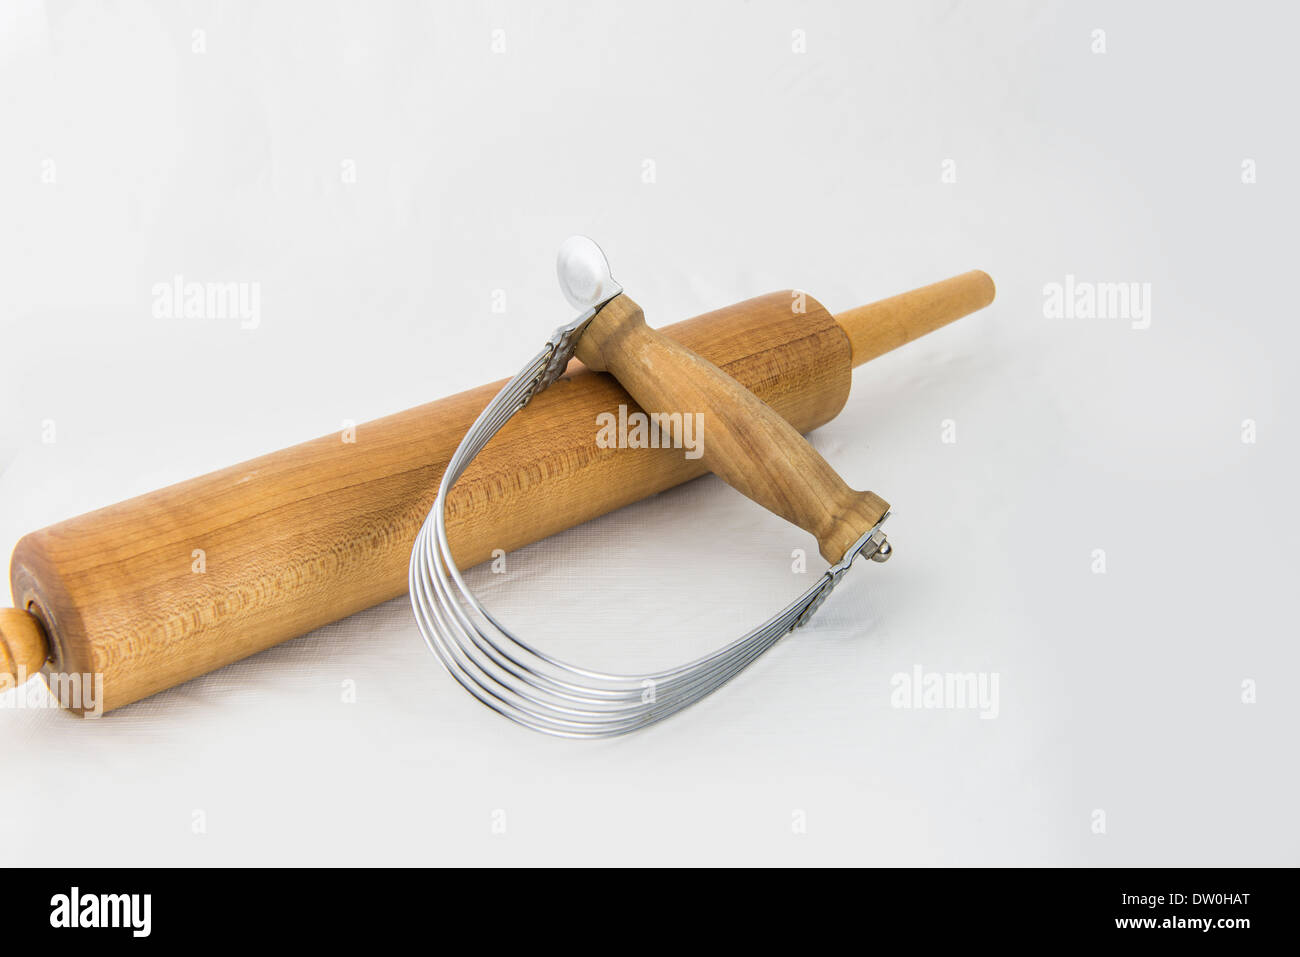 Two kitchen appliances used in the making of pie cruist. A pastry blender, and a rolling pin, isolated on white. Stock Photo